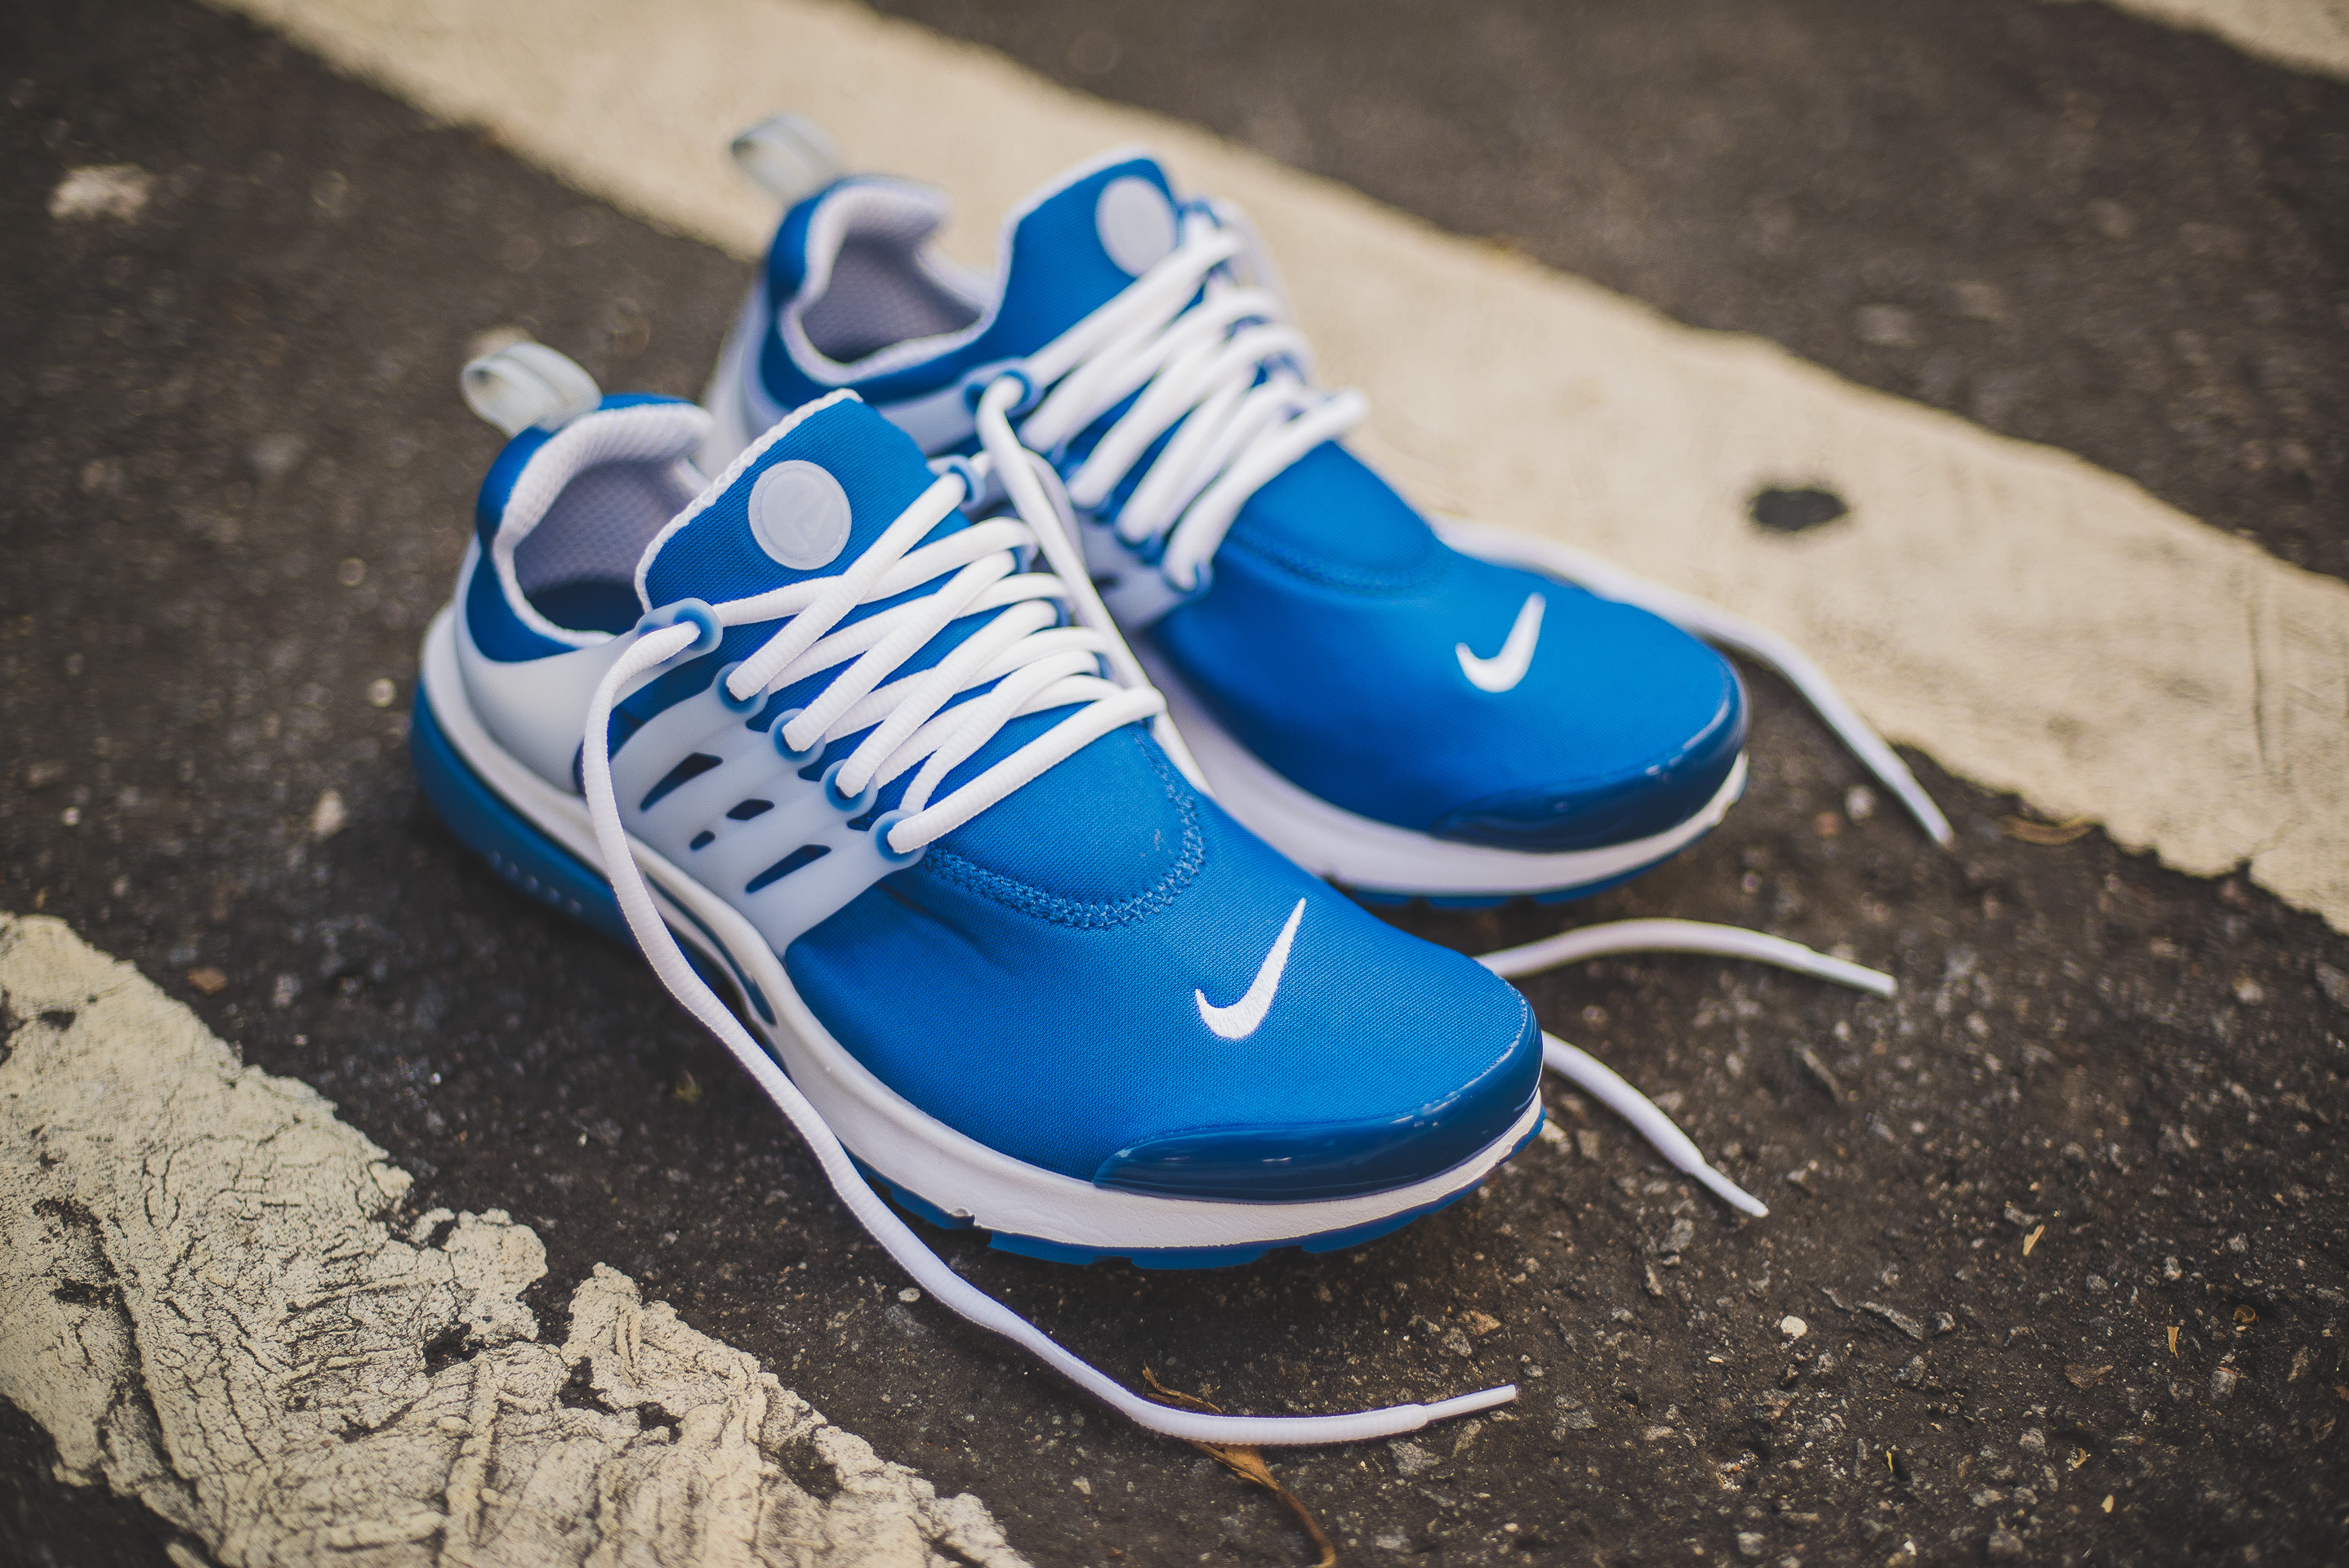 Looking to Buy Nike Presto Navy Shoes This Year. Here Are 15 Reasons They